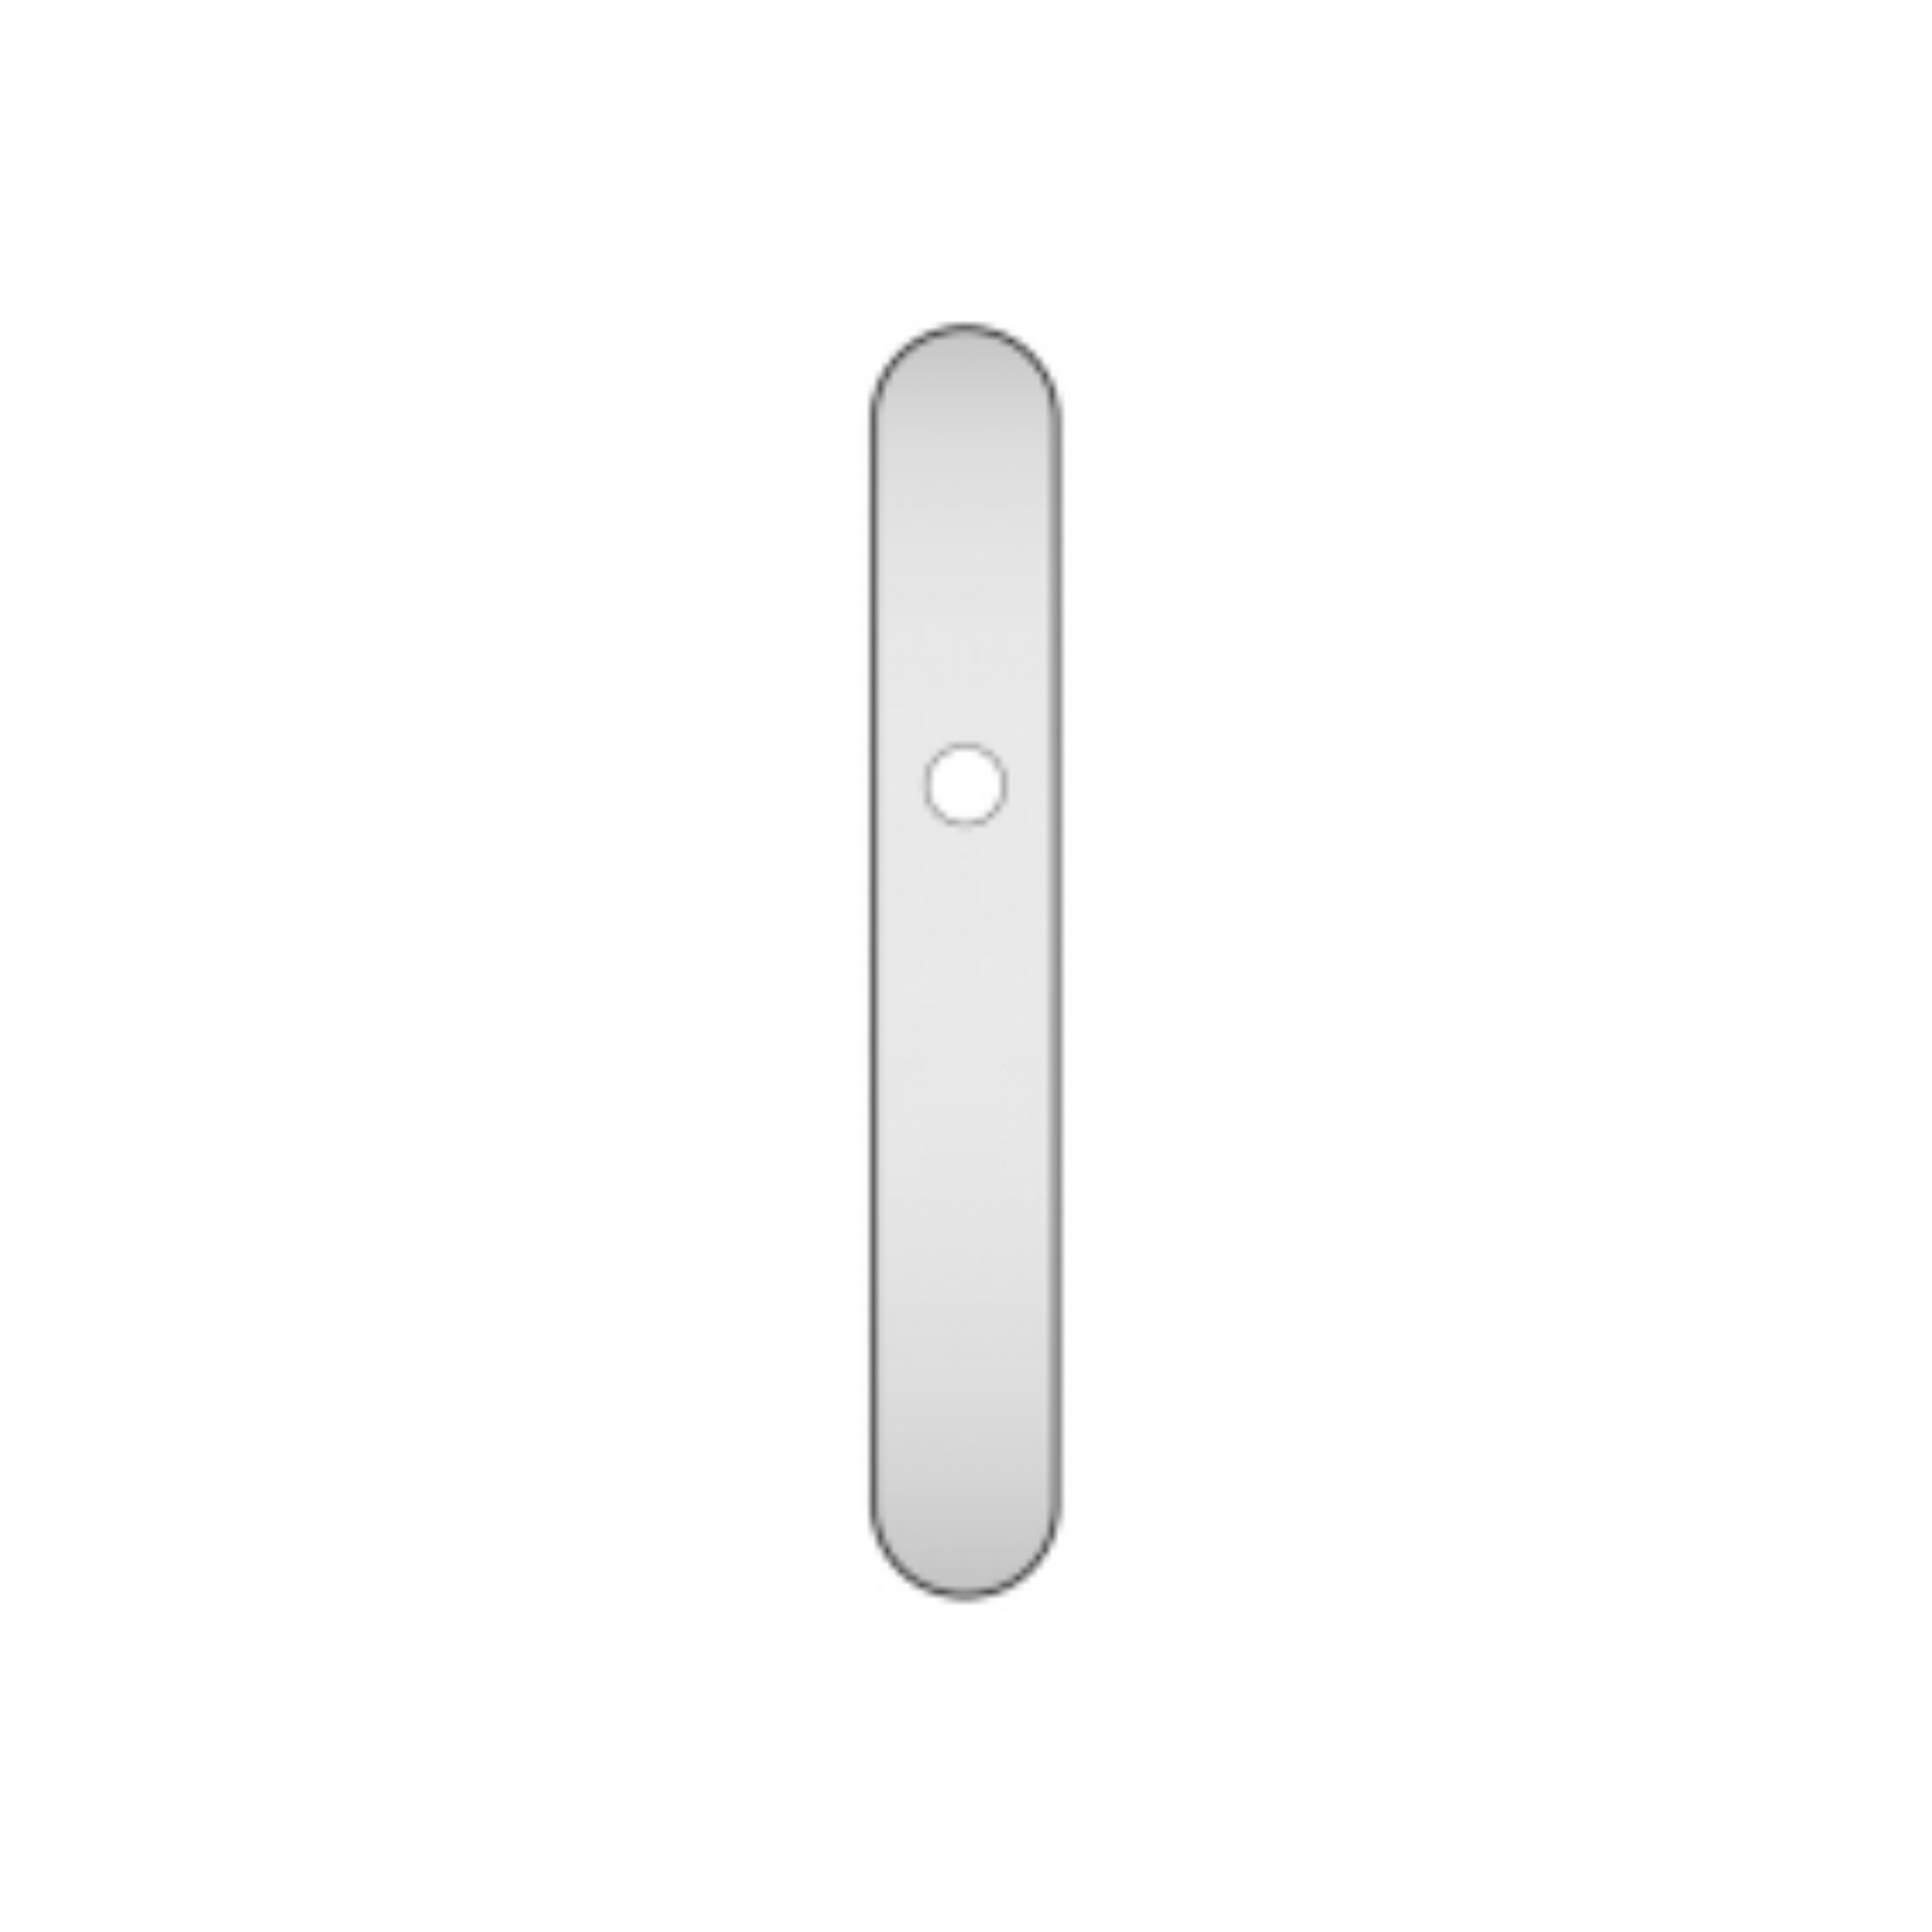 QS4483 BLANK, Plate, Narrow Oval, 245mm (l) x 36mm (w), Supplied without QS Handle, Stainless Steel, QS